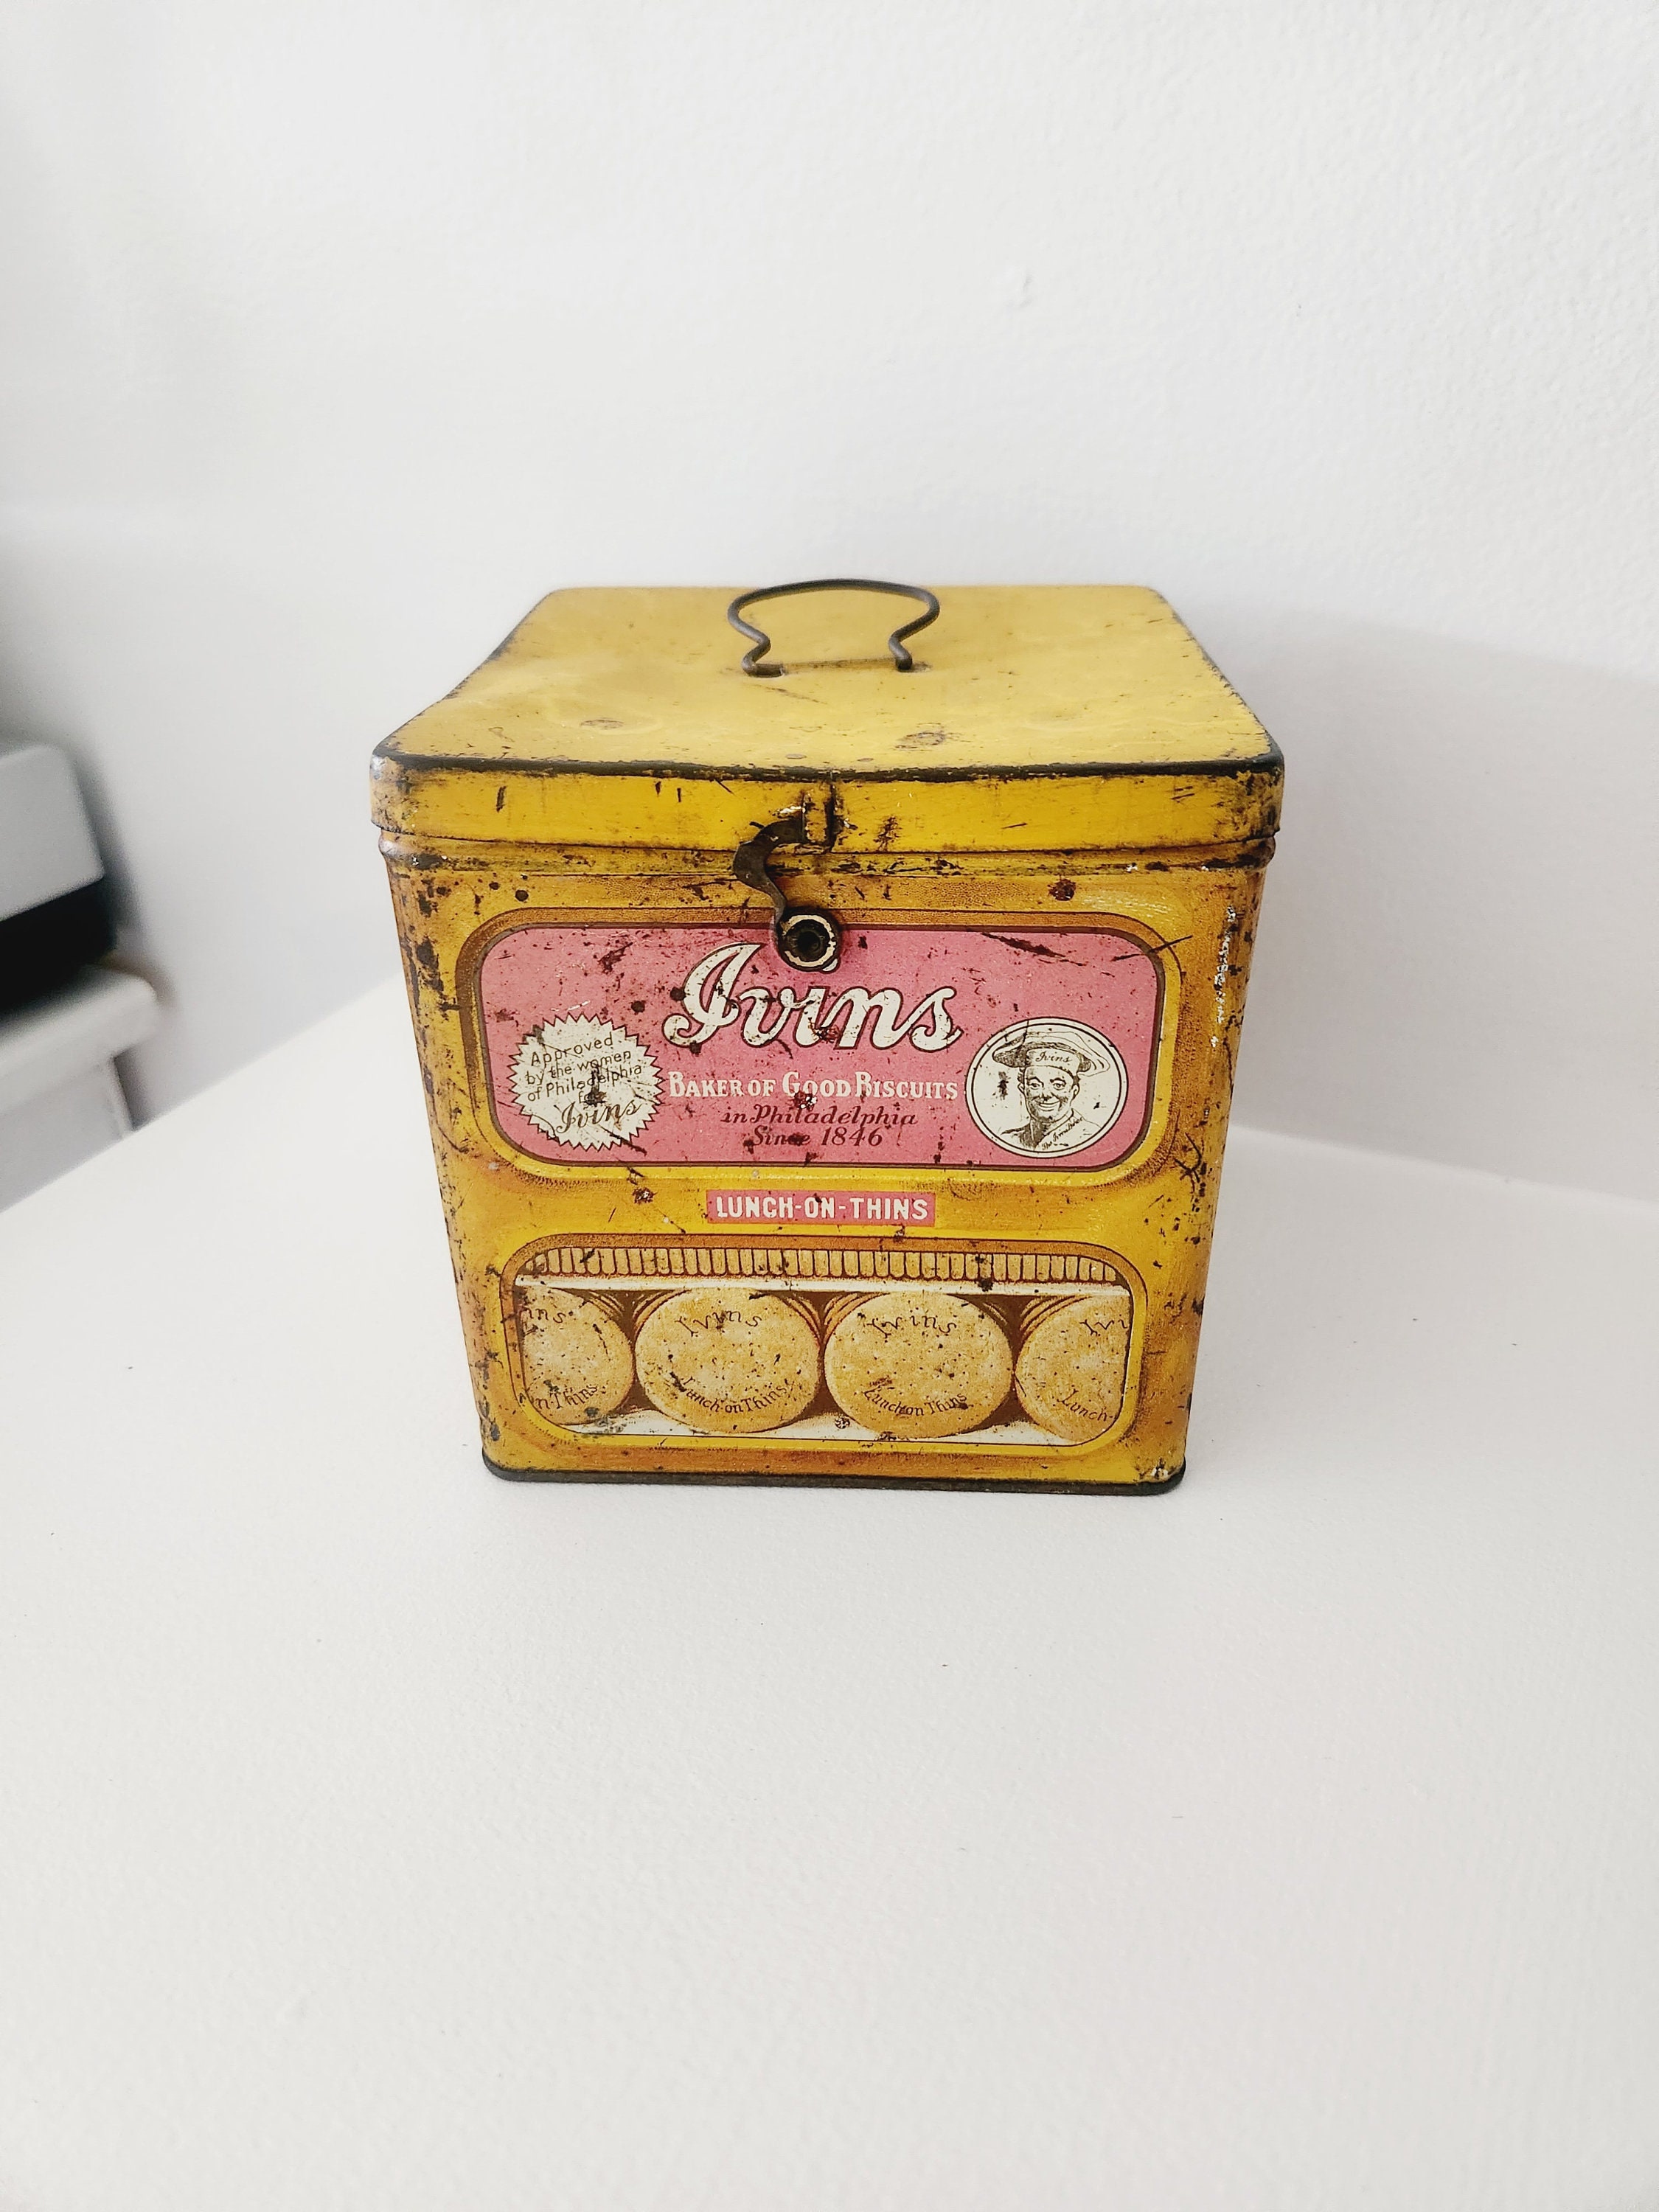 Antique Biscuit Cracker Tin Ivins Lunch on Thins Baker of Good Biscuits  Philadelphia Tins 1920s Antique Cookie Tin Canister 